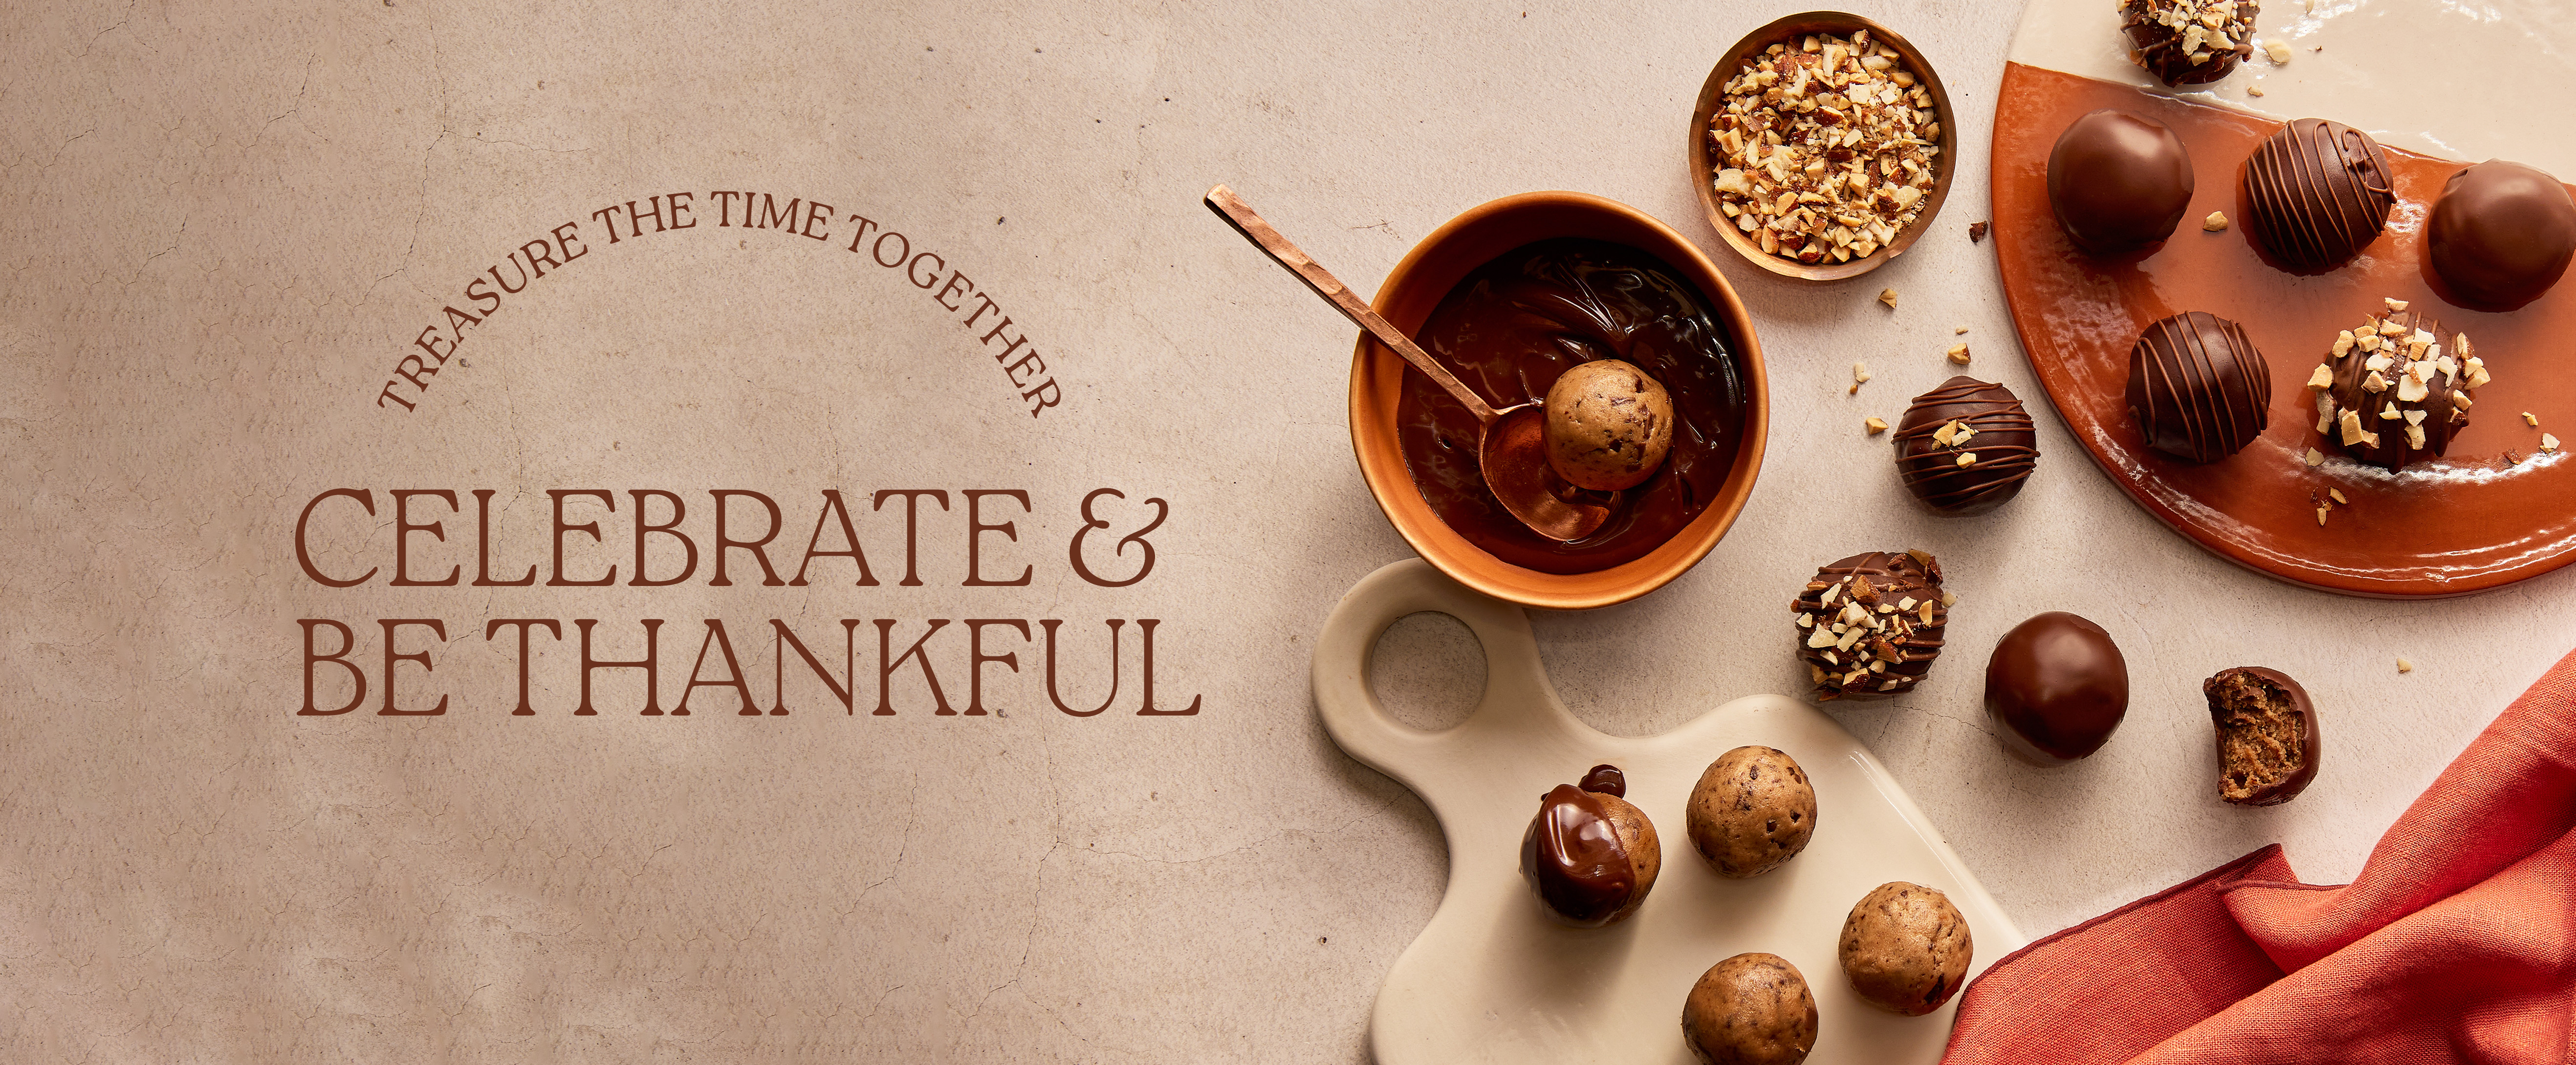 Chocolate-dipped cookie bites with text Celebrate and Be Thankful - Treasure the time together